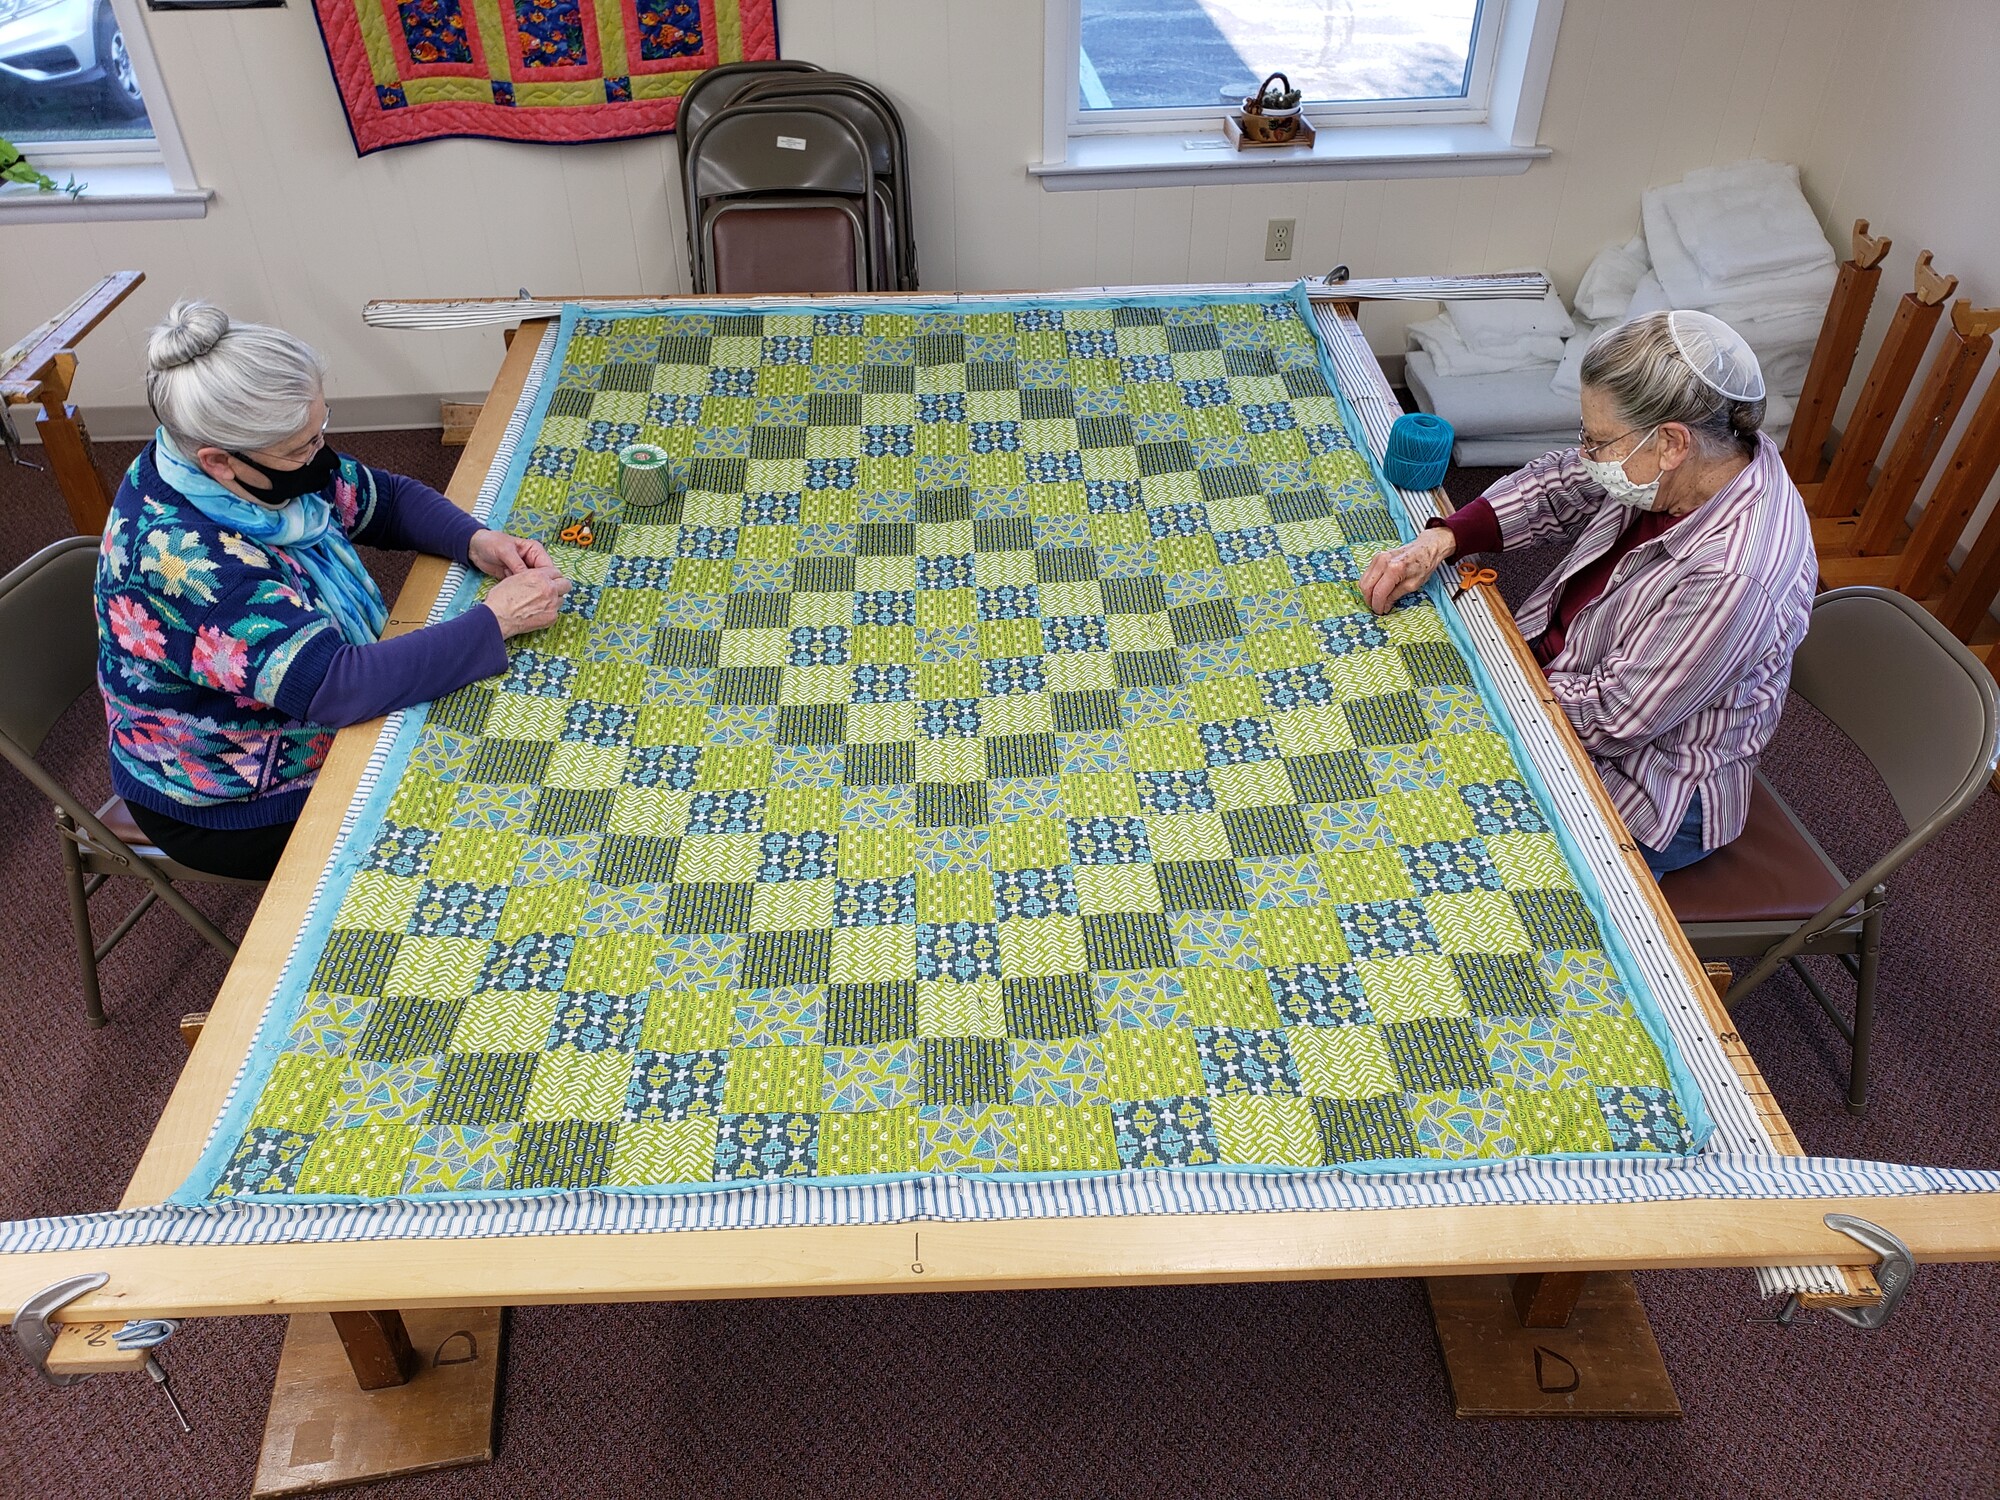 Two women stitching a green quilt